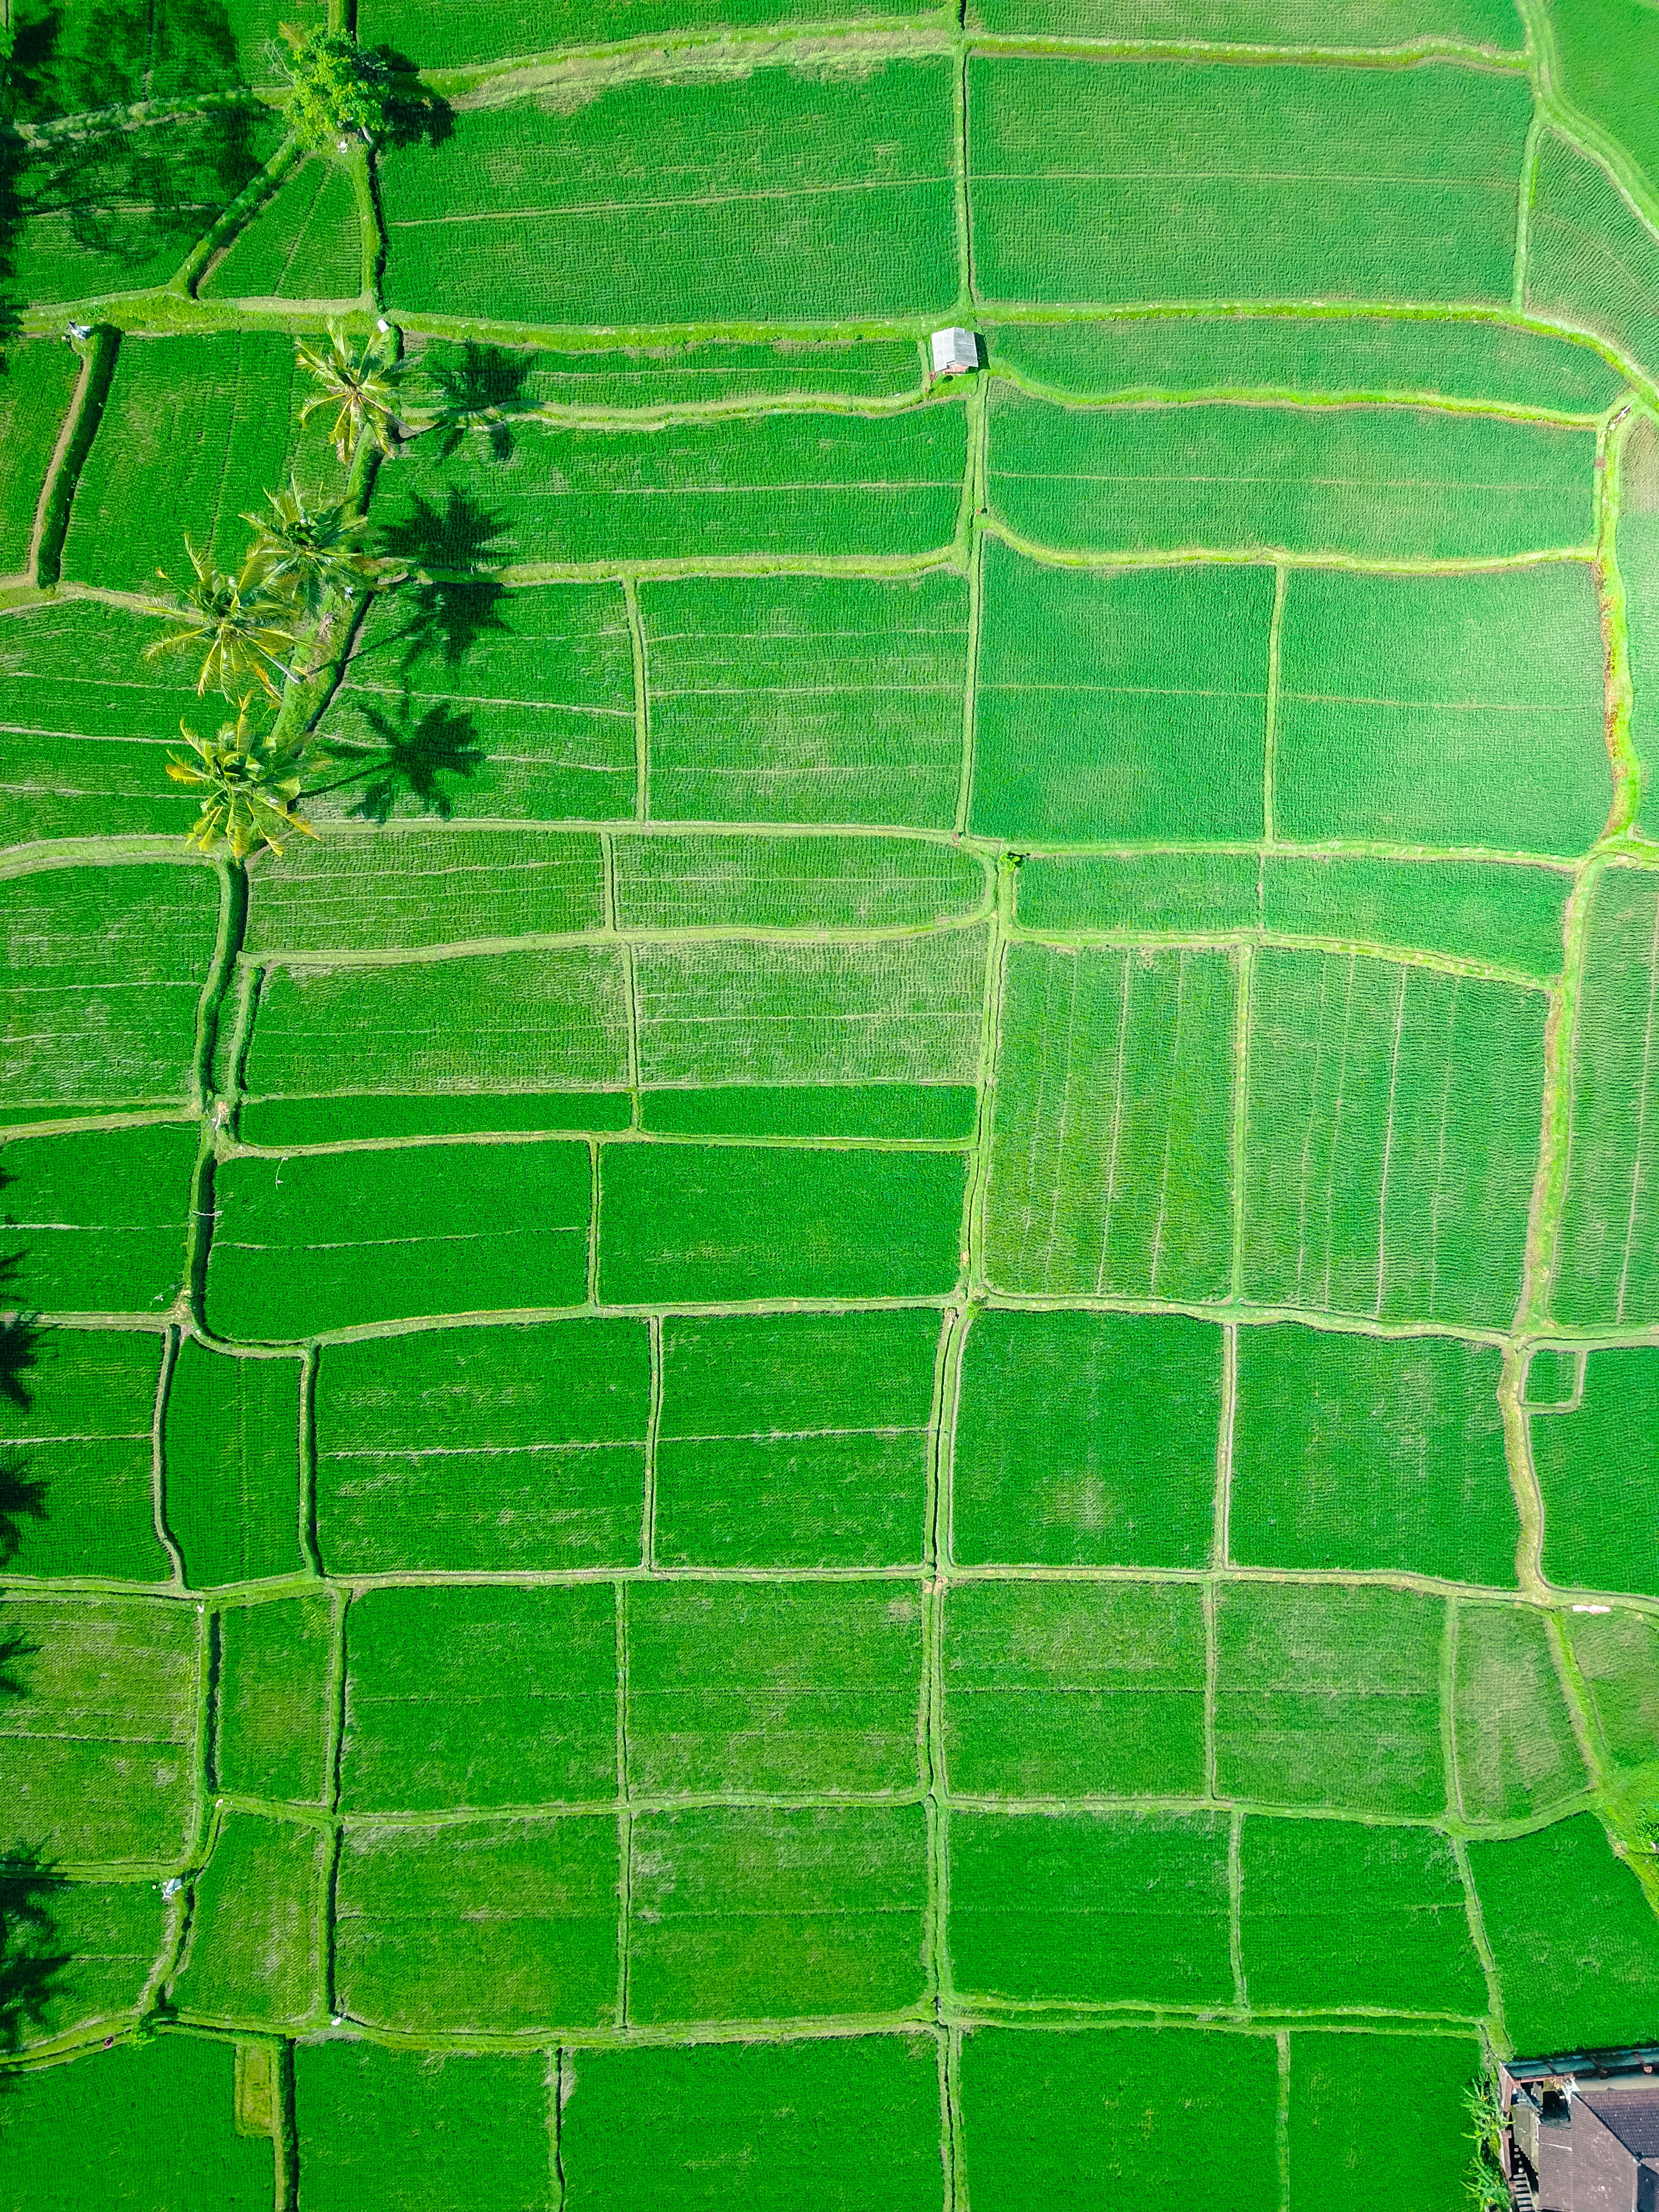 indonesia, fields, nature, palms, green, ubud images